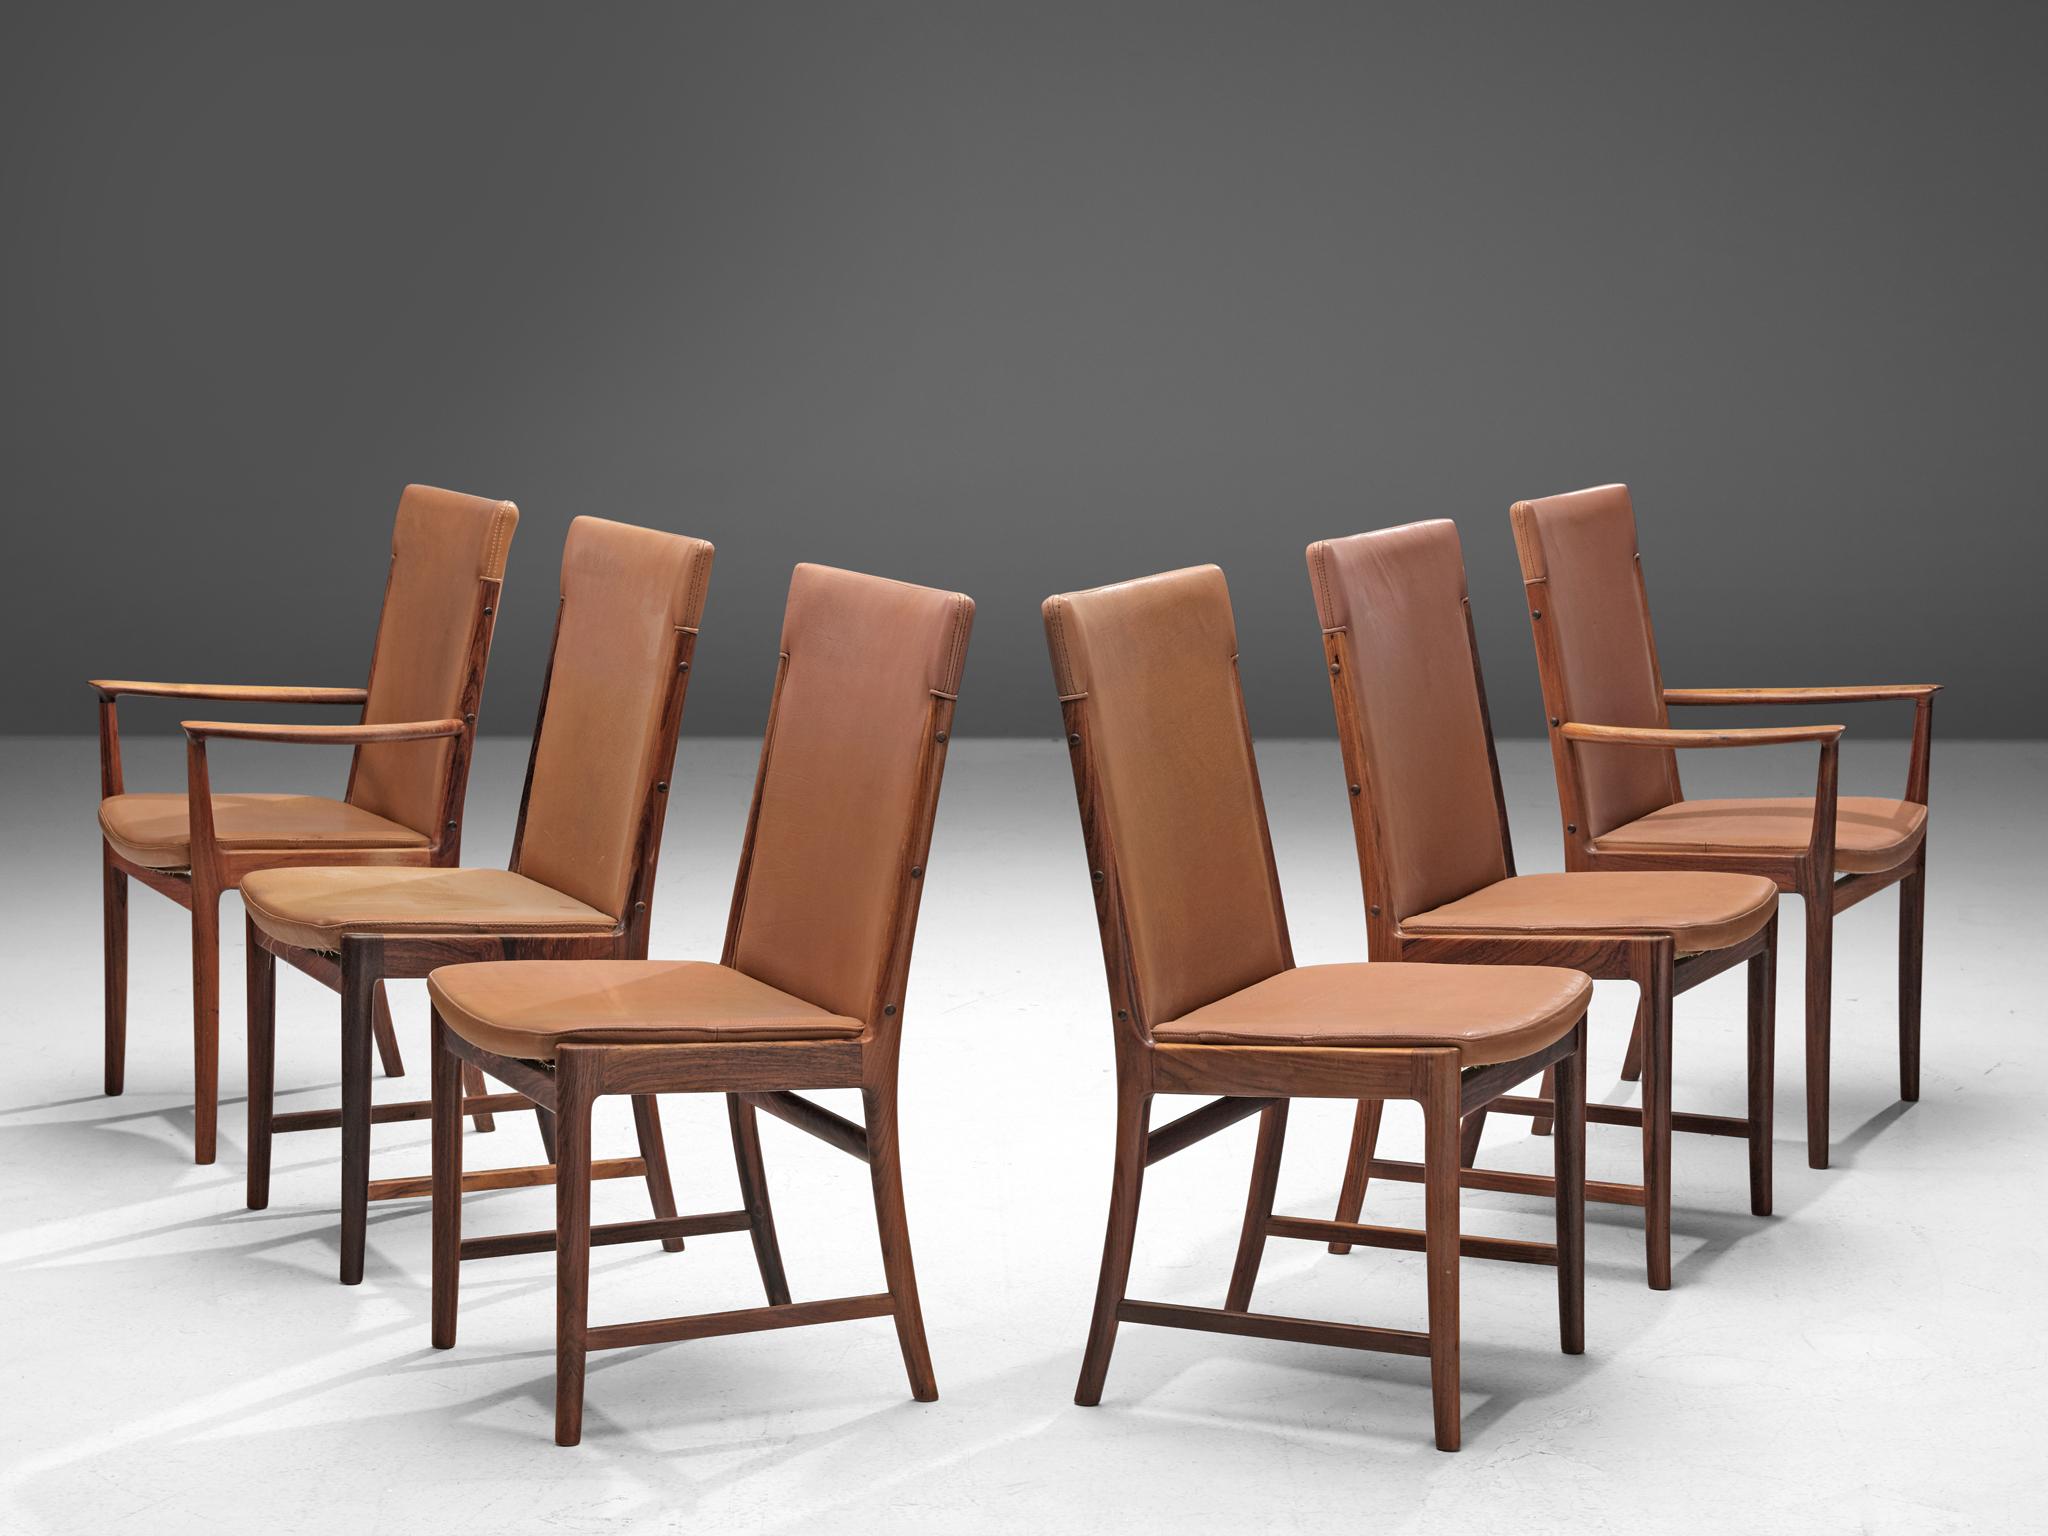 Kai Lyngfeldt Larsen for Søren Willadsen, set of six dining chairs, rosewood and leather, Denmark, 1950s.

Elegant dining chairs with a high back designed by Kai Lyngfeldt Larsen. The set consists of four chairs without arms and two with armrests.